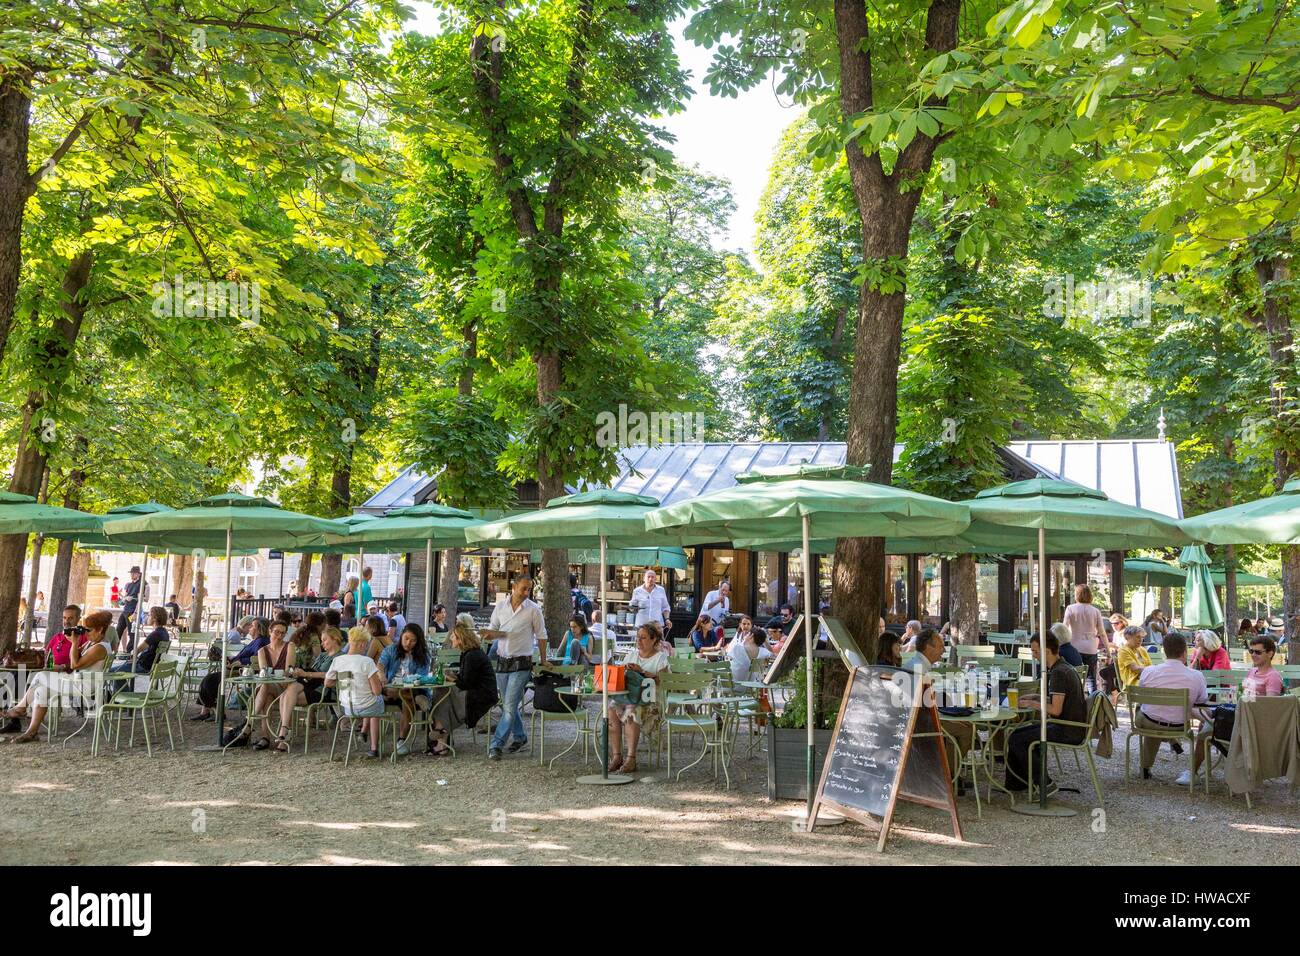 France, Paris, the Luxembourg garden, cafe restaurant The Fountain Pavilion Stock Photo